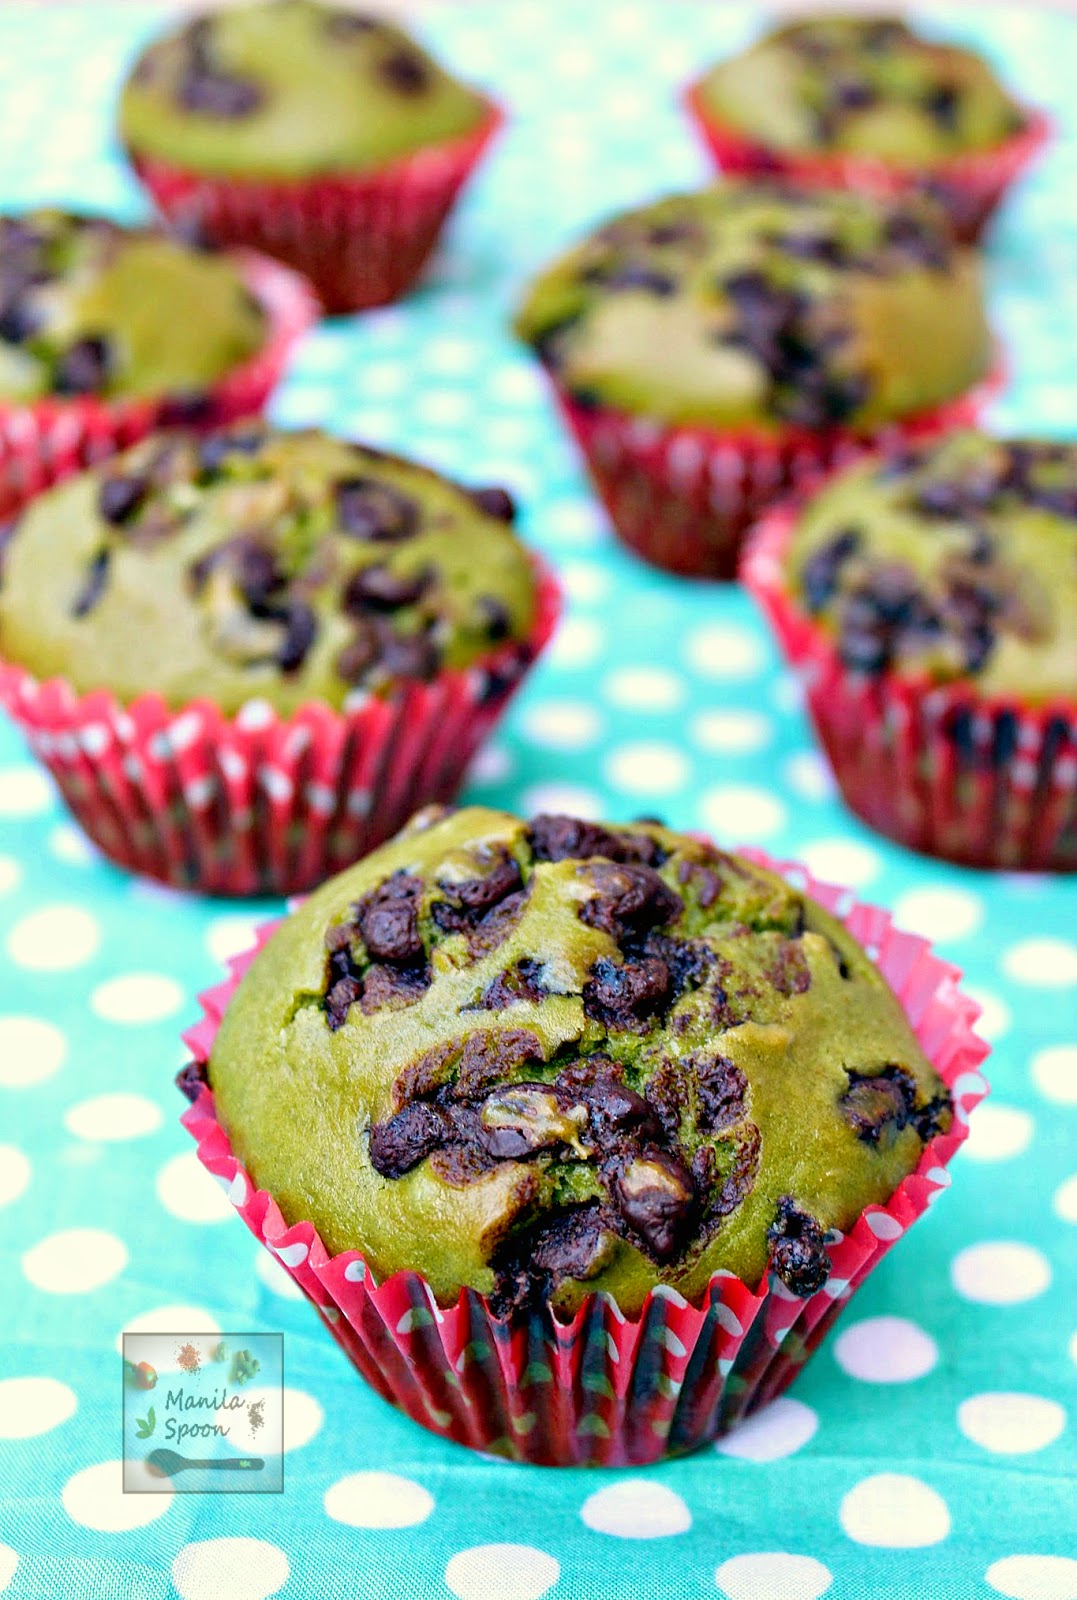 With a subtle hint of green tea and chocolate flavors, too plus a natural vibrant green color these moist and tender muffins are great for tea time or any time you fancy a sweet snack. #green #tea #chocolate #muffins #snacks